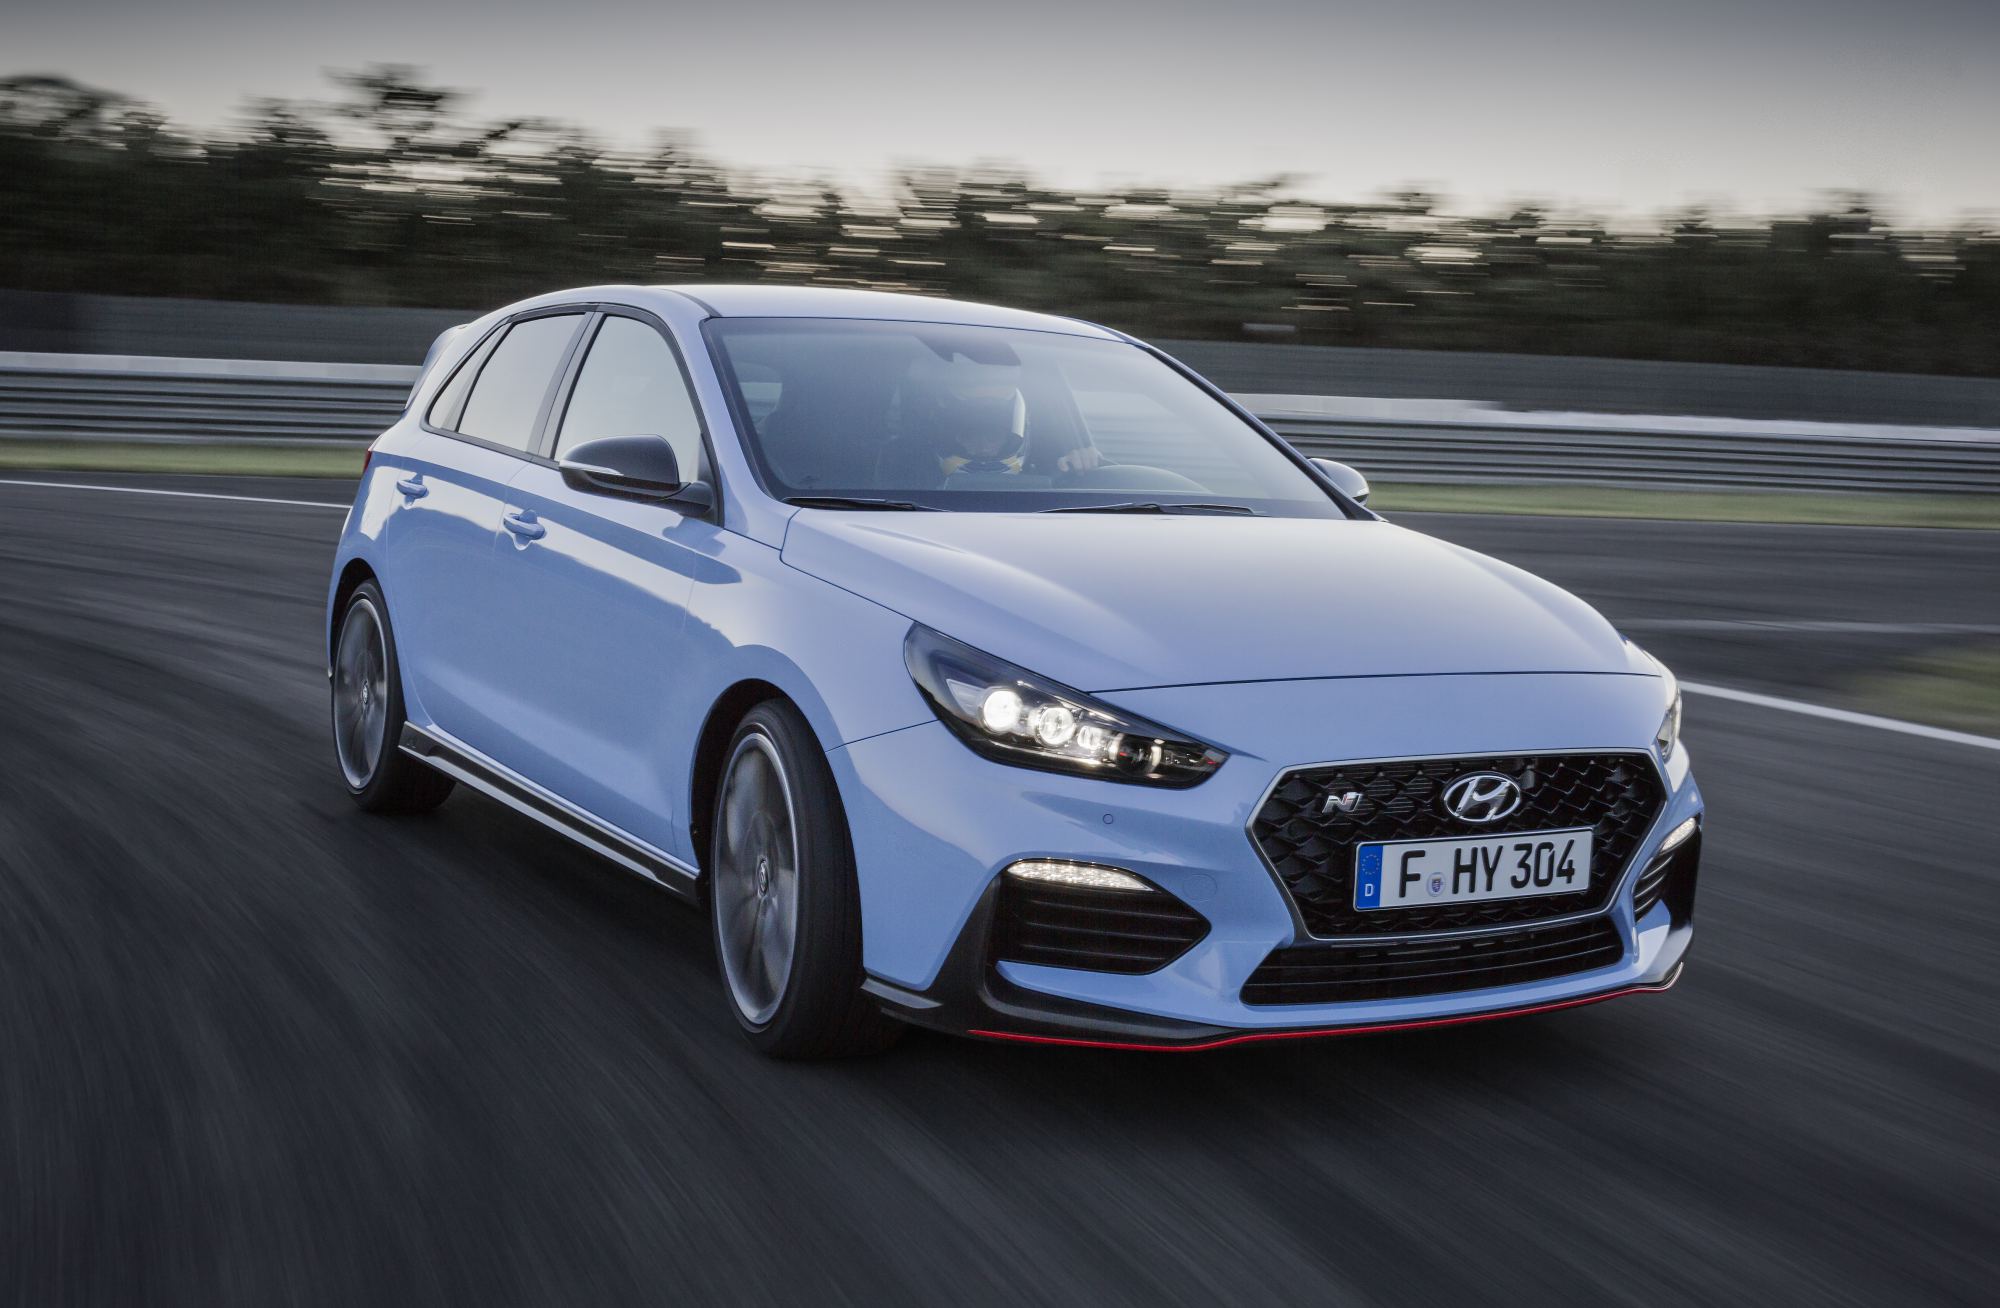 News Hyundai Reveals The i30 N, Their First Real Hot Hatch